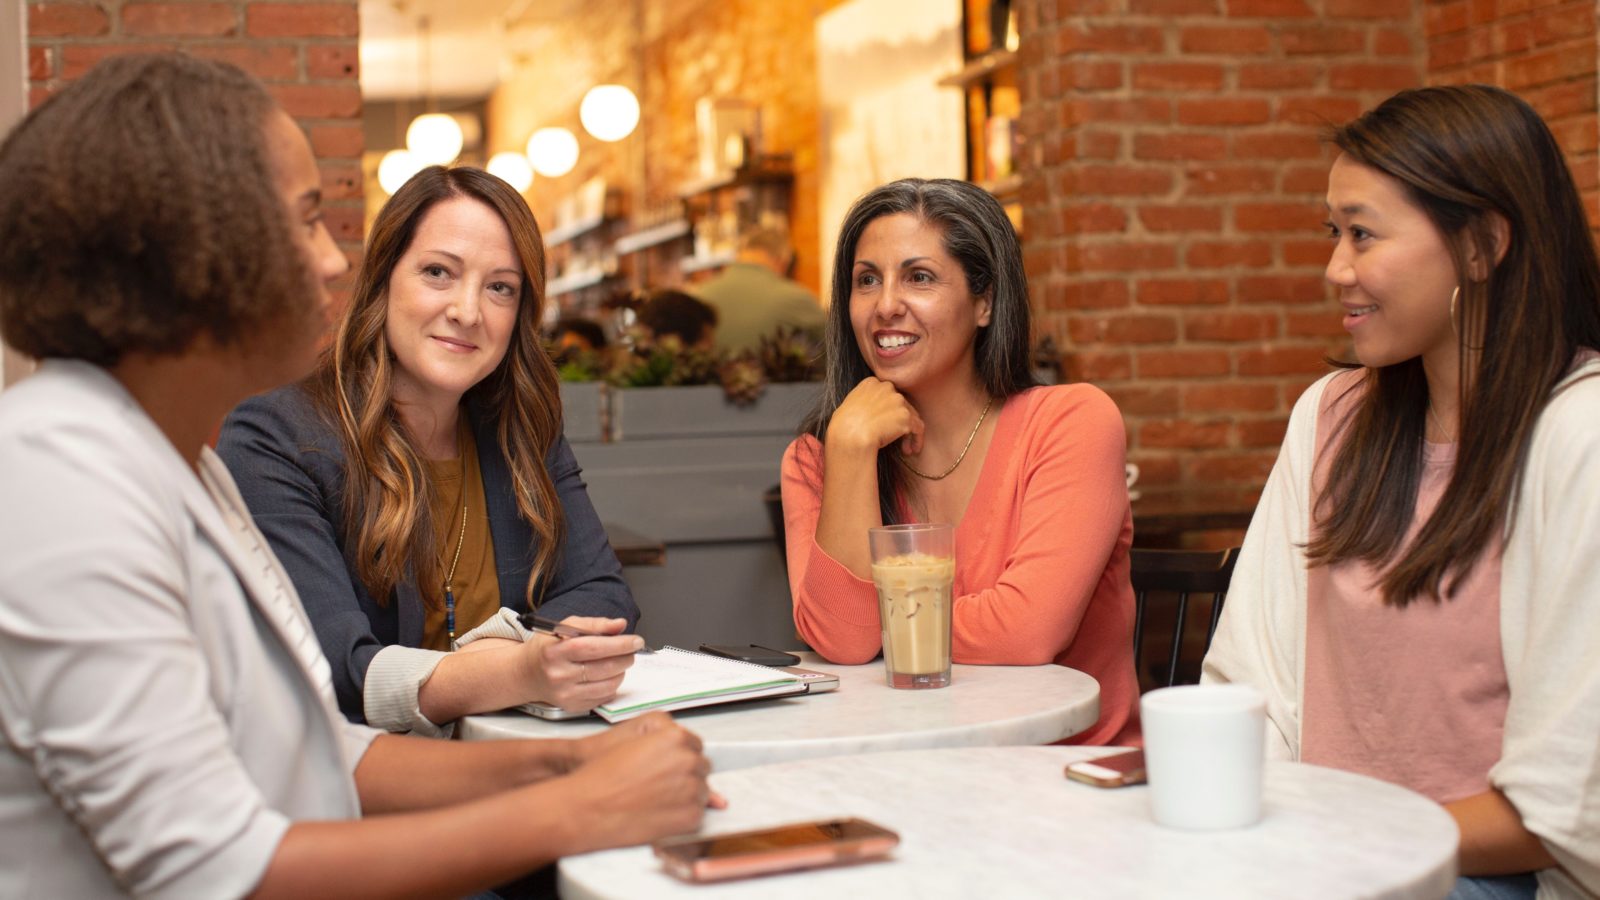 3 women sit in a restaurant listening to another woman tell them about her nonprofit's impact in the community. These kinds of in-person conversations are an important part of a winning donor management strategy.